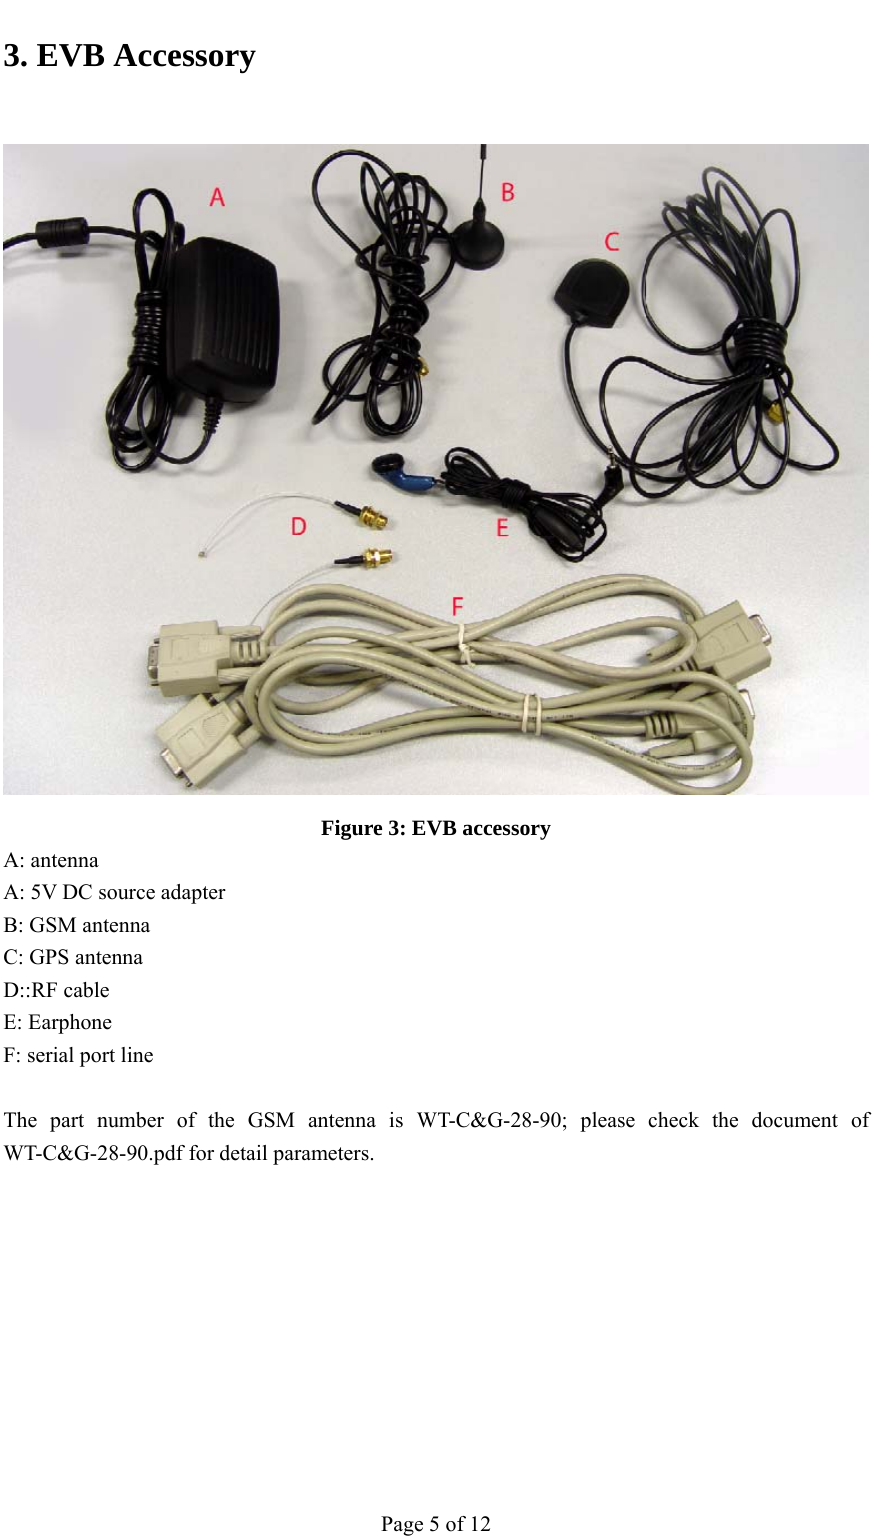                                           3. EVB Accessory  Figure 3: EVB accessory A: antenna A: 5V DC source adapter B: GSM antenna   C: GPS antenna D::RF cable   E: Earphone F: serial port line  The part number of the GSM antenna is WT-C&amp;G-28-90; please check the document of WT-C&amp;G-28-90.pdf for detail parameters.    Page 5 of 12 